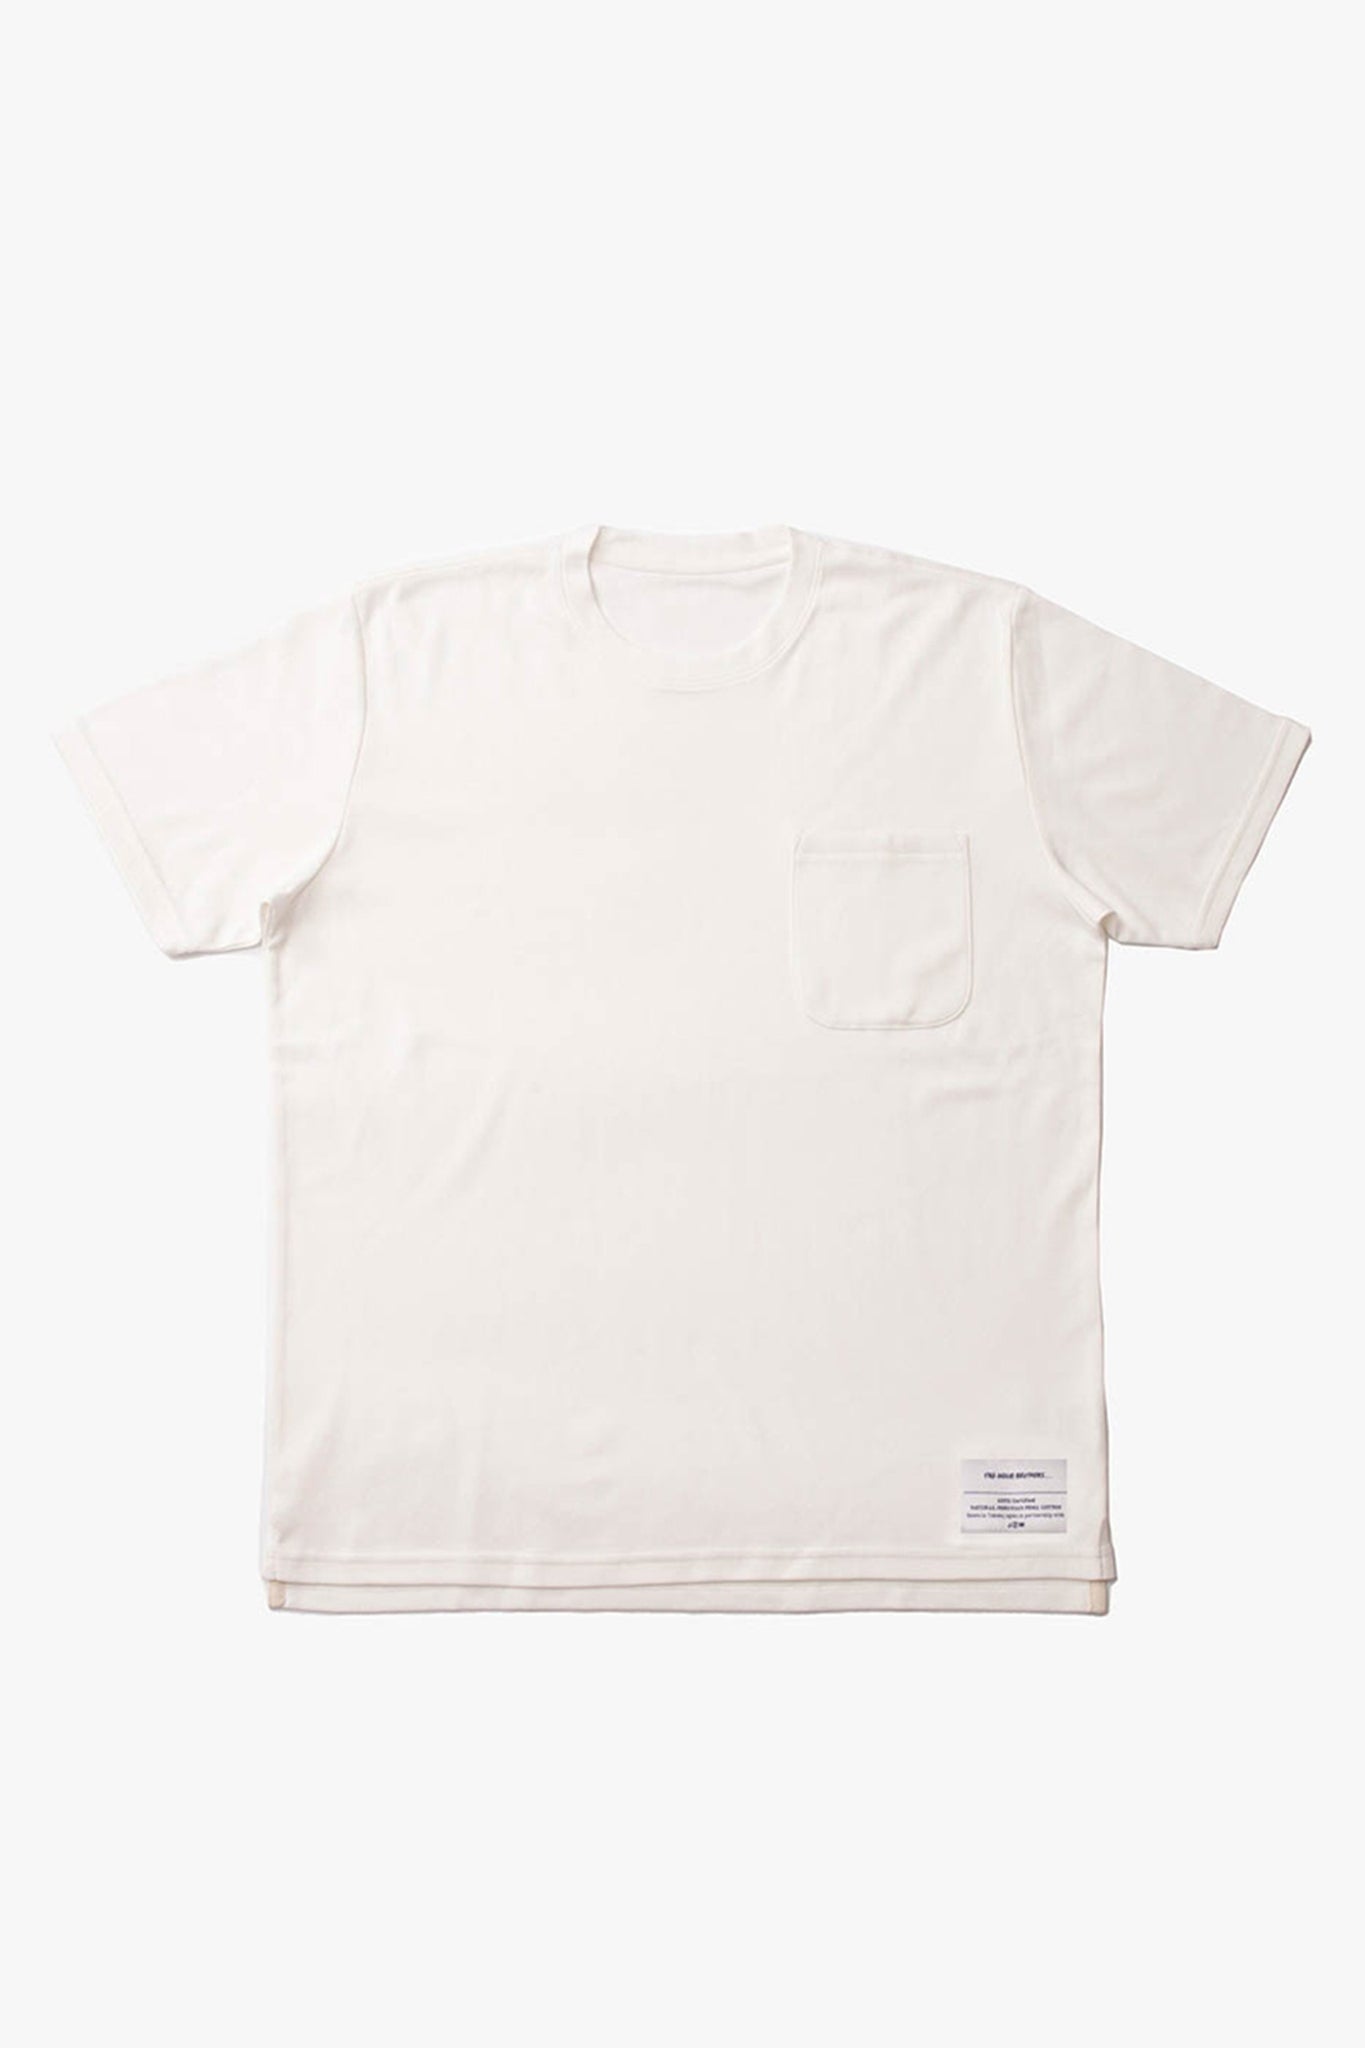 THE INOUE BROTHERS... "BASIC POCKET T-SHIRT / NATURAL PIMA COTTON PROJECT / WHITE"